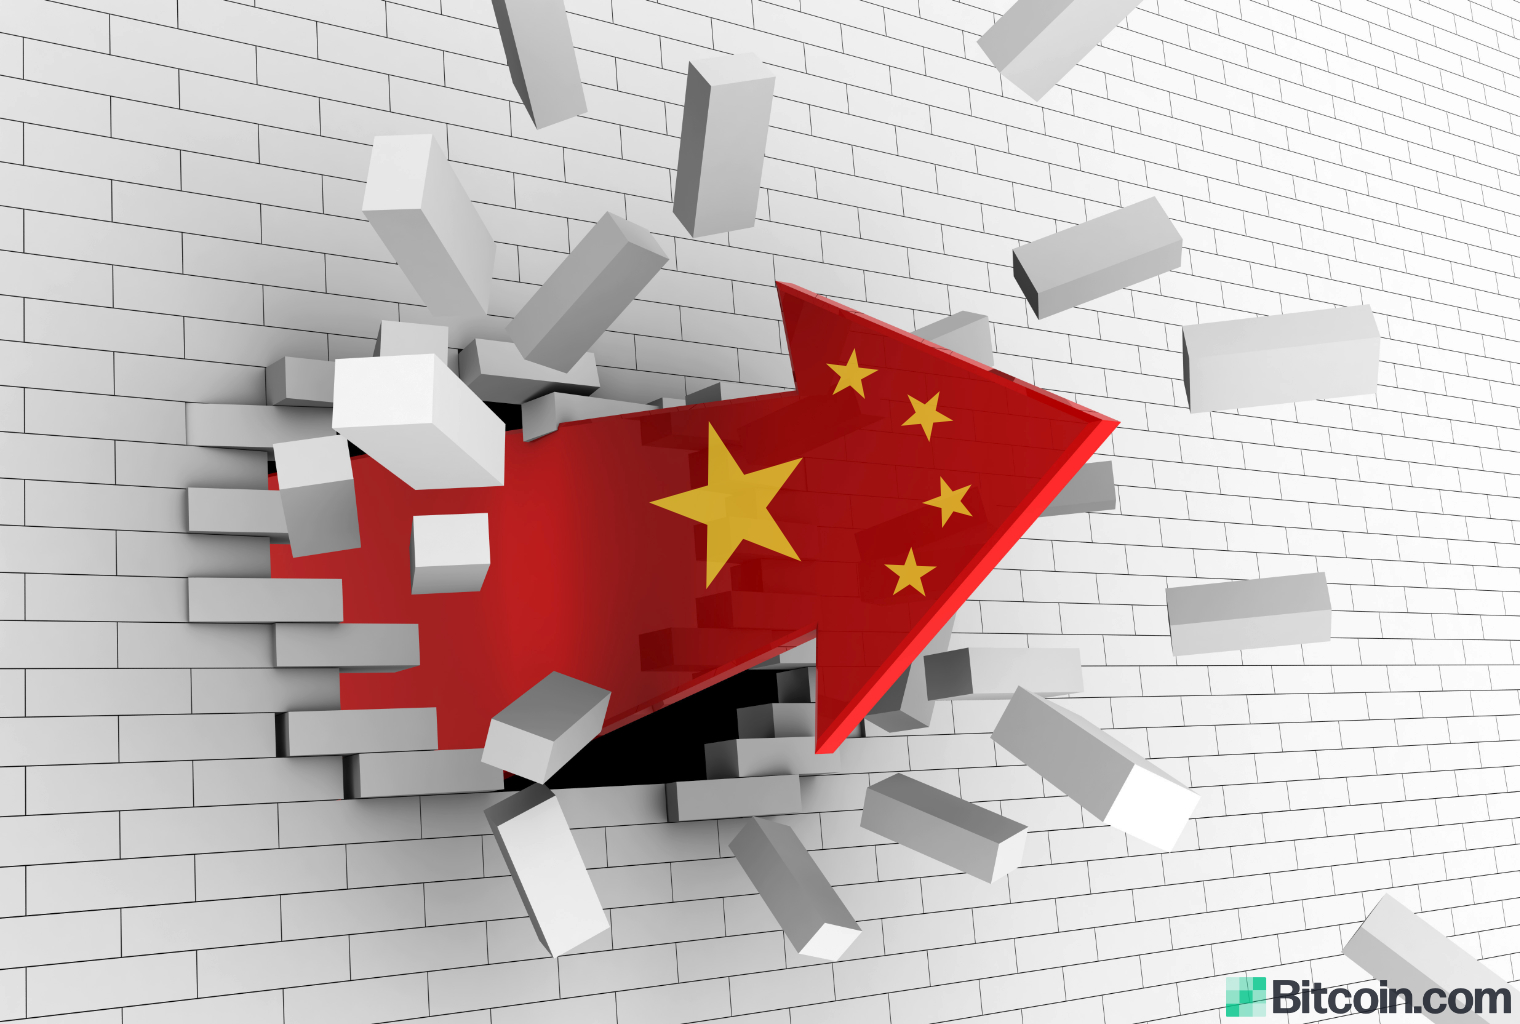 33,000 Companies in China Claim to Use Blockchain Technology